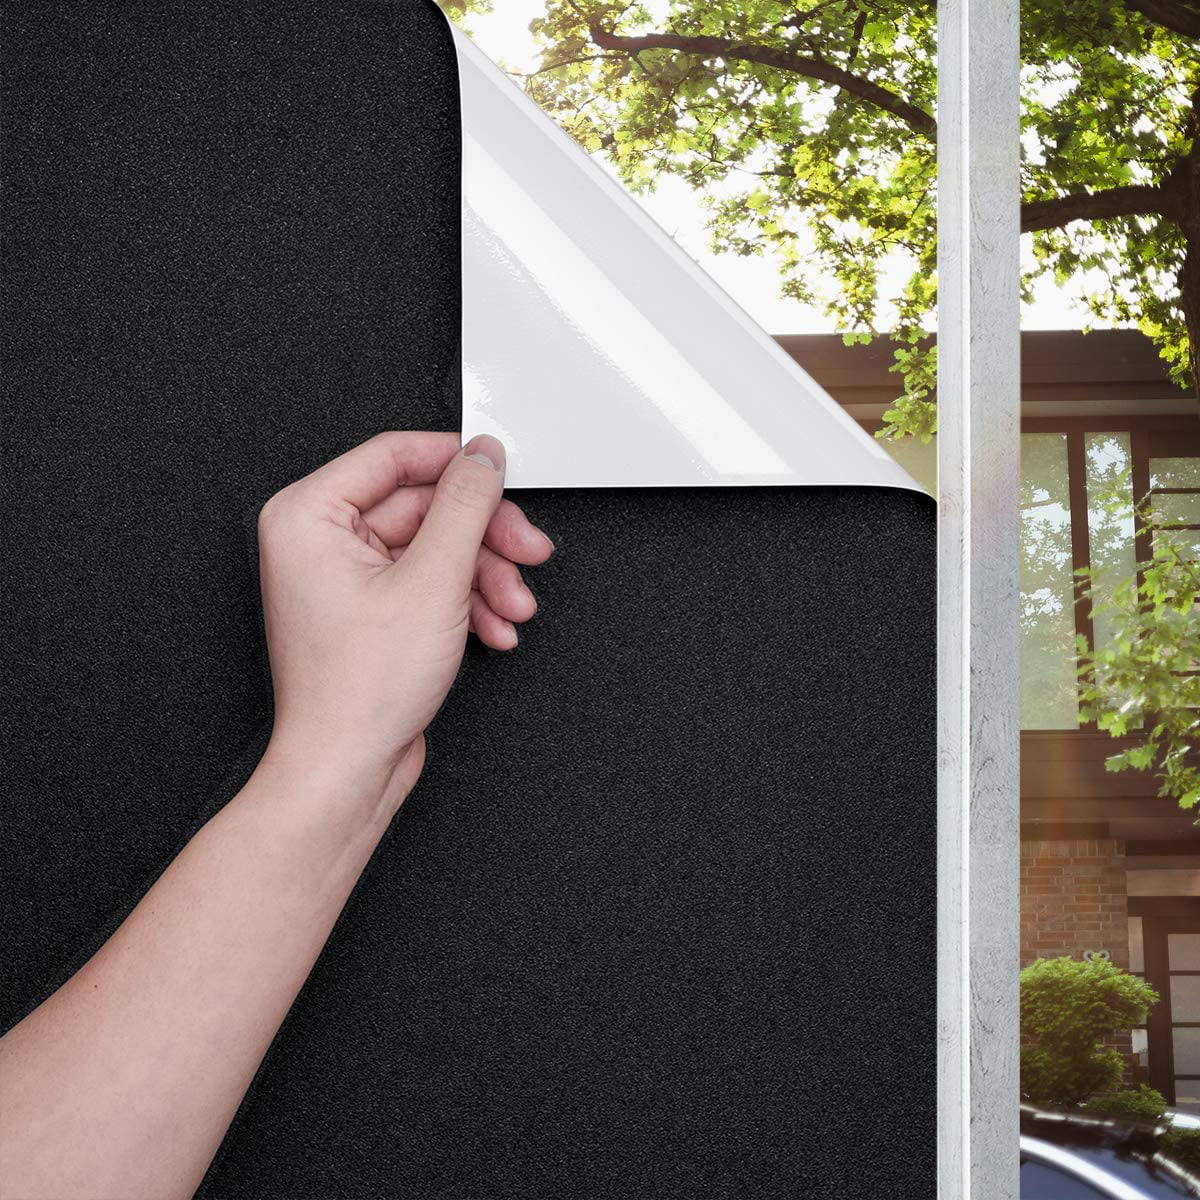 Details about   Self-adhesive Total Blackout Window Film UV Protection Privacy Tint Glass Cover 